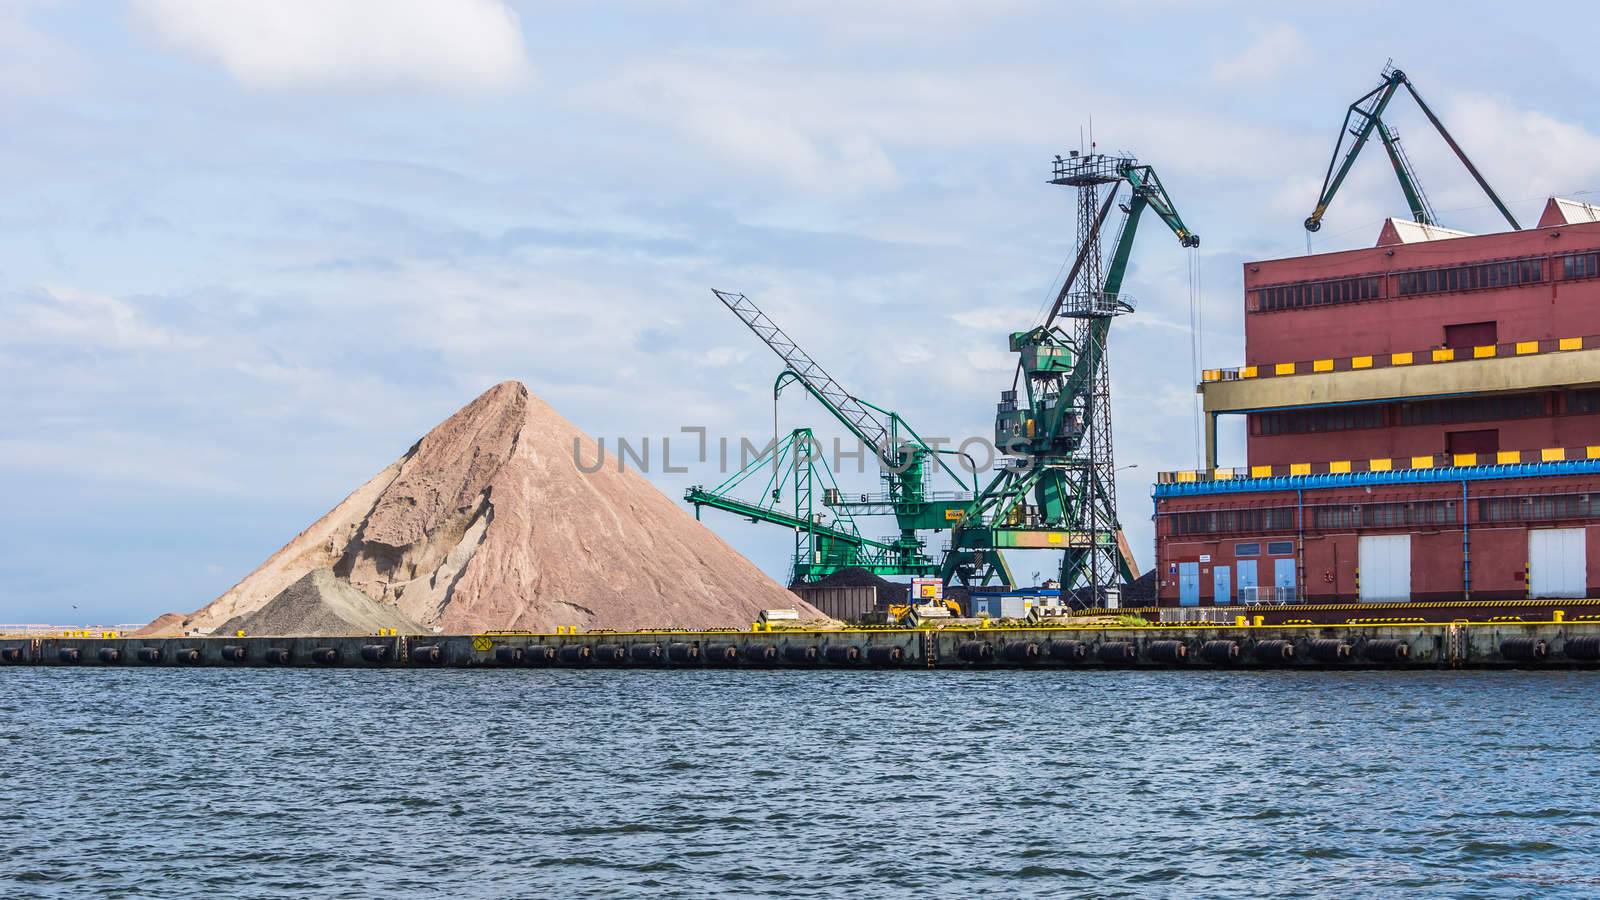 Heap of gravel on the quay, on July 10, 2013, in the Port of Gdynia - the third largest seaport in Poland, specialized in handling containers, ro-ro and ferry transport.